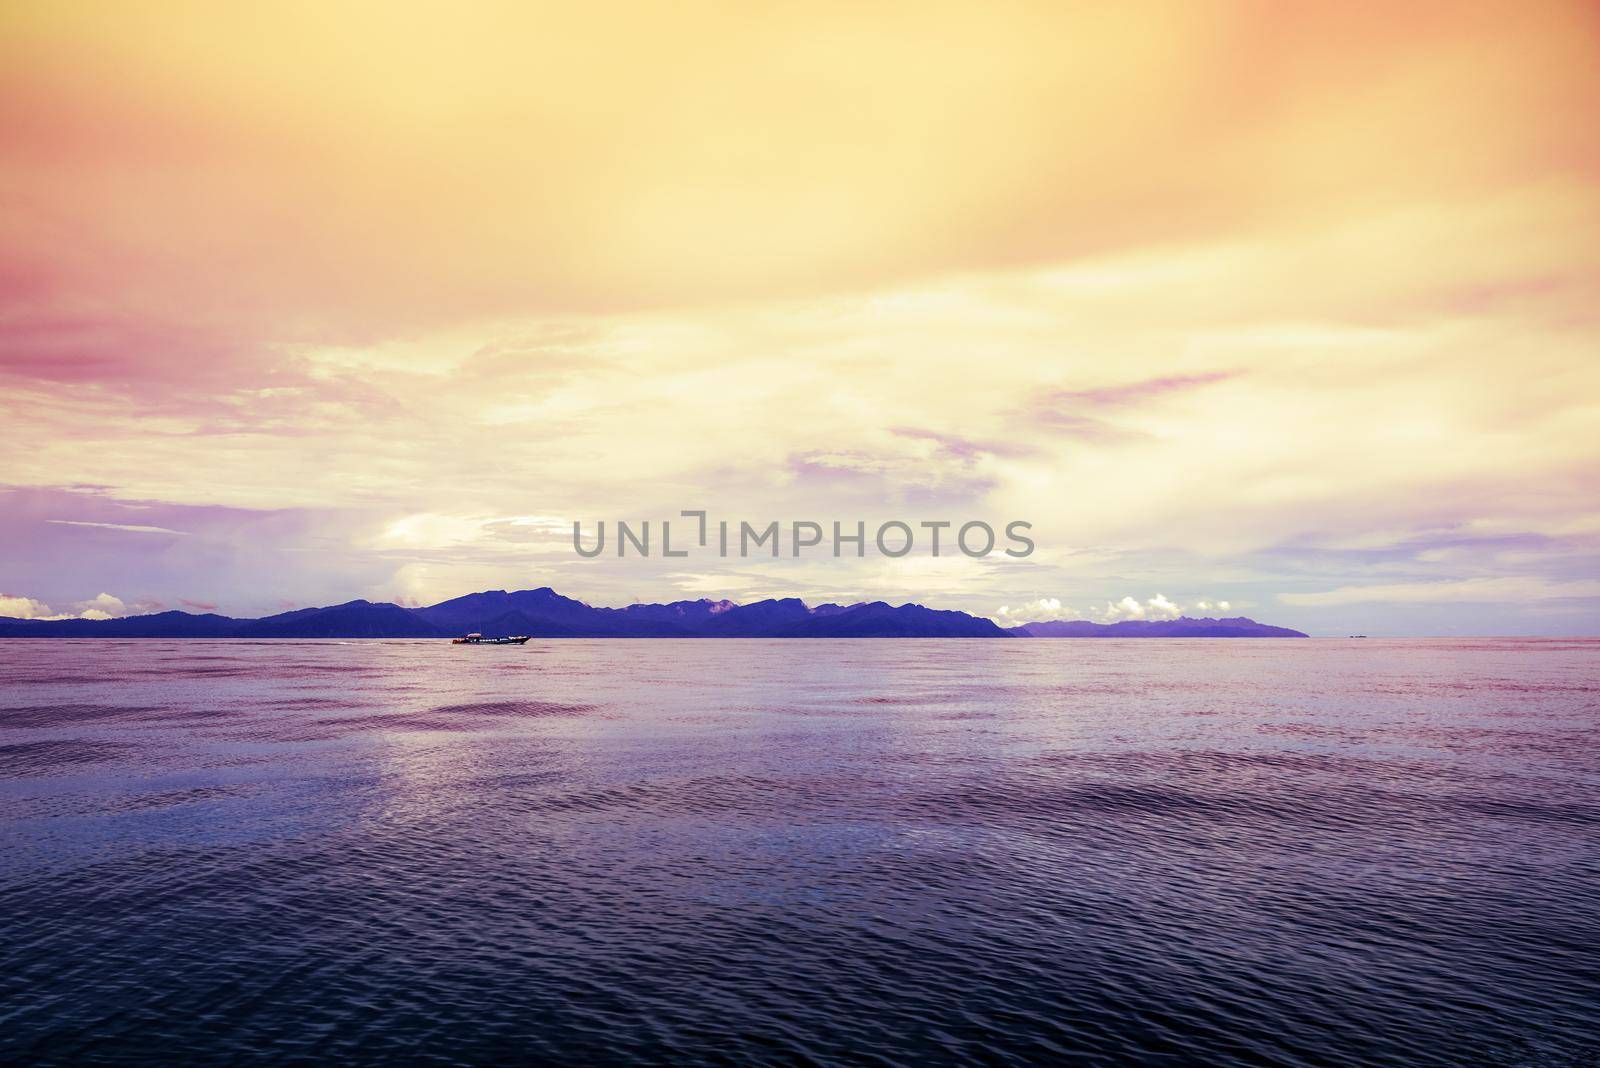 Local passenger boat are sailing on the water surface in the sea with a silhouette of the island in the background. under the bright red yellow sky during the sunset at Pak Bara bay, Satun, Thailand